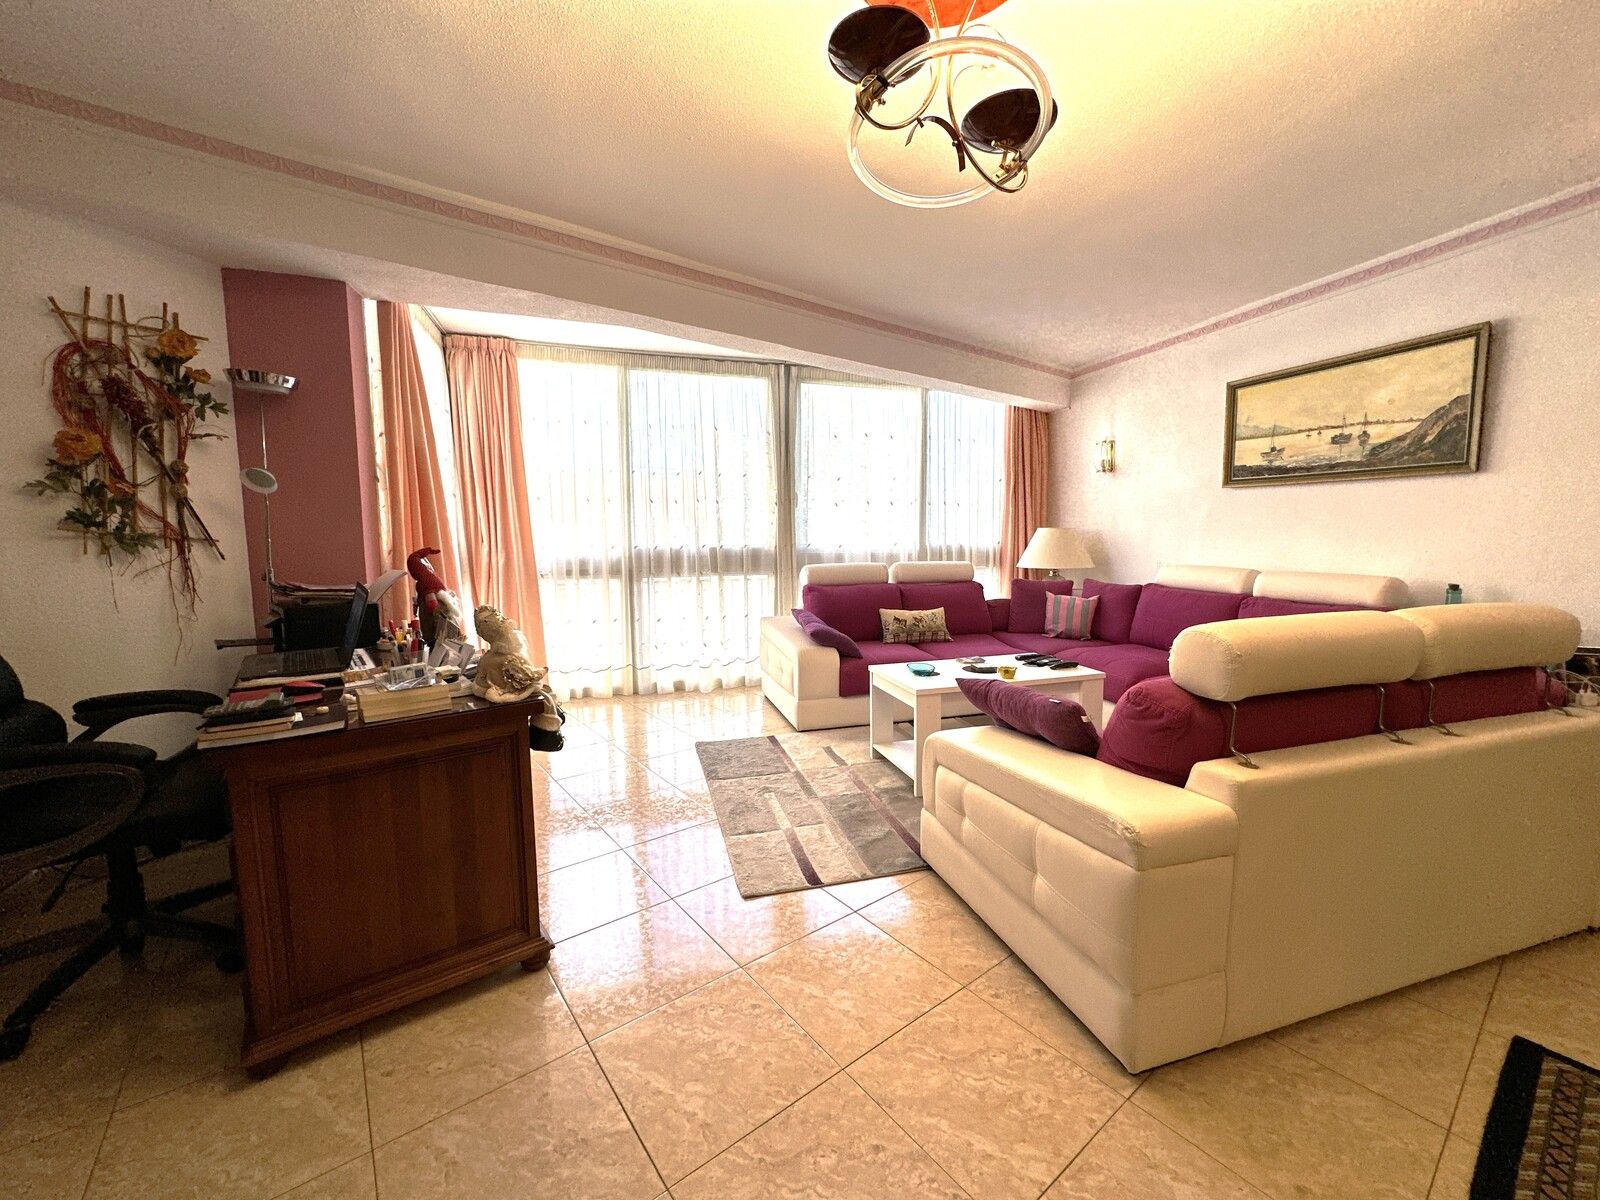 Spacious Apartment within Walking Distance to Amenities and a 350m Walk to Calpe's Arenal Bol Beach